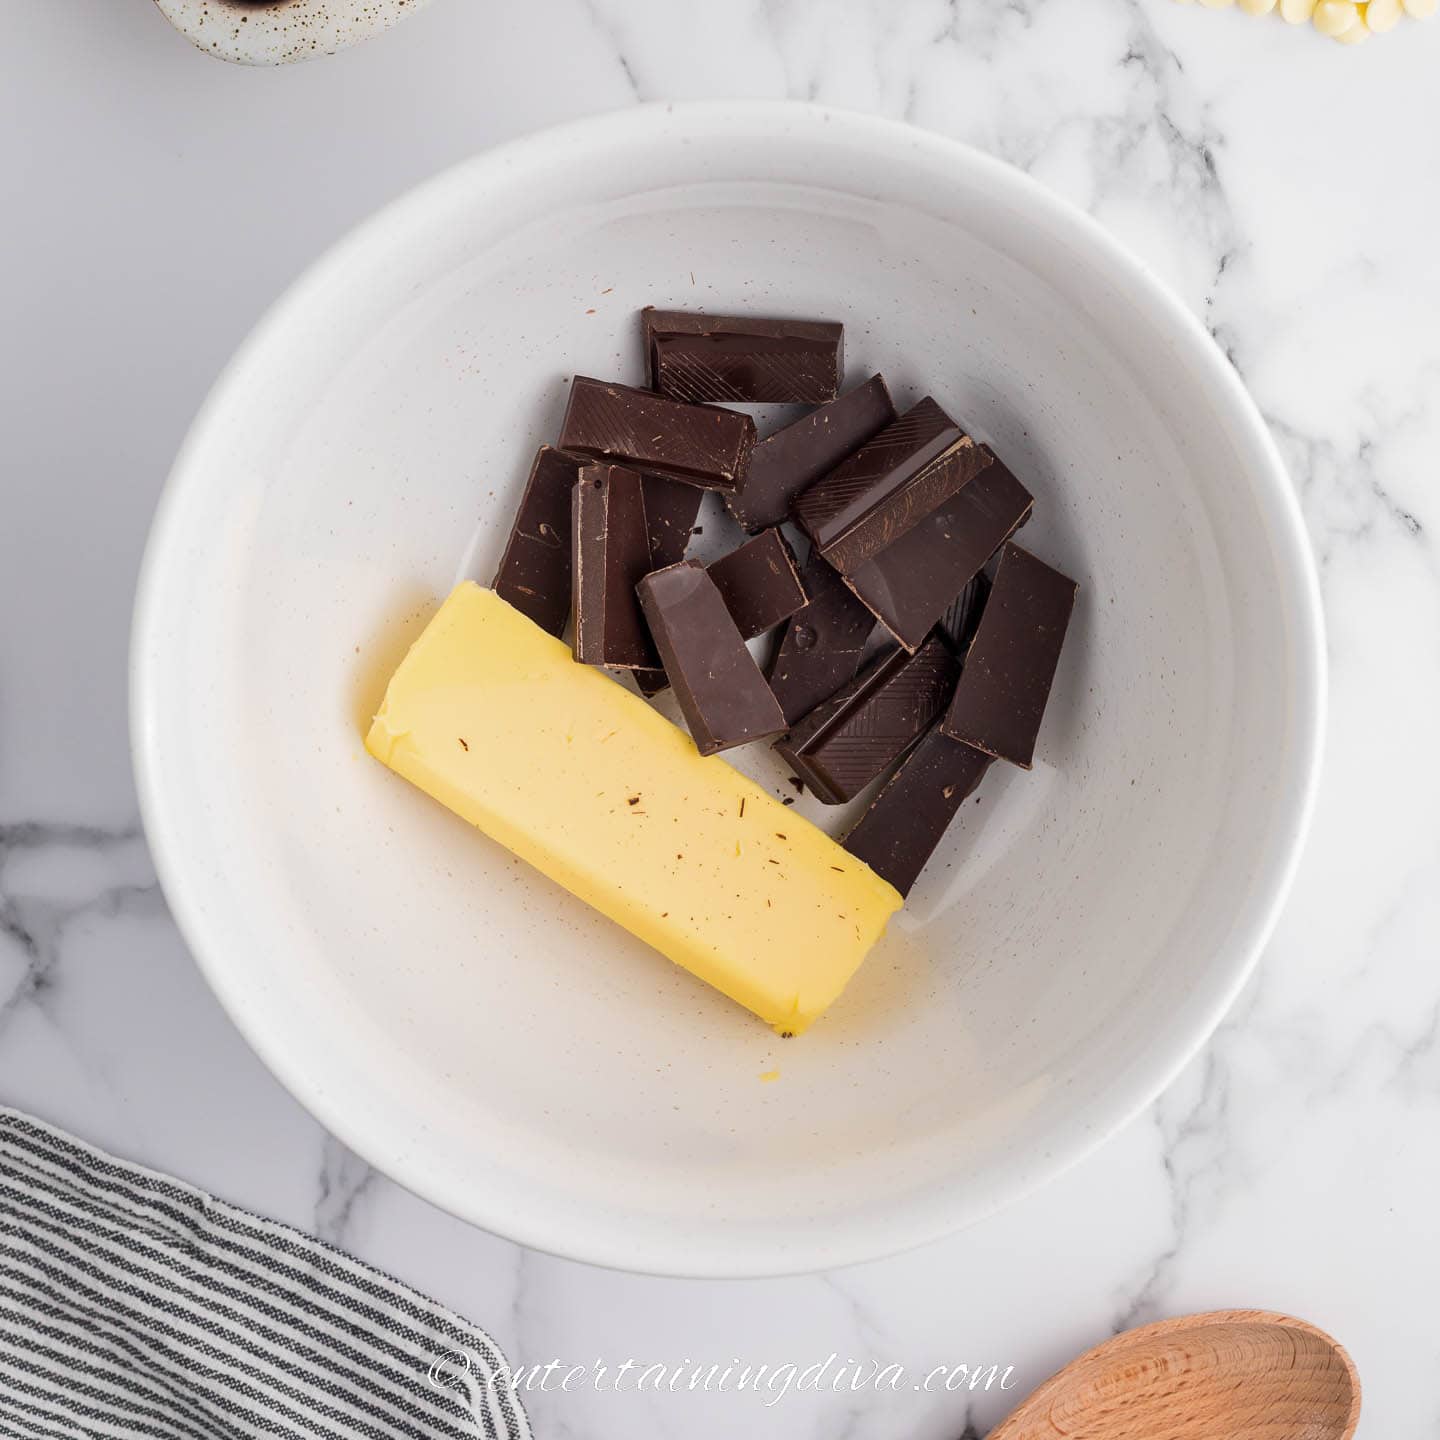 butter and chocolate in a microwaveable bowl